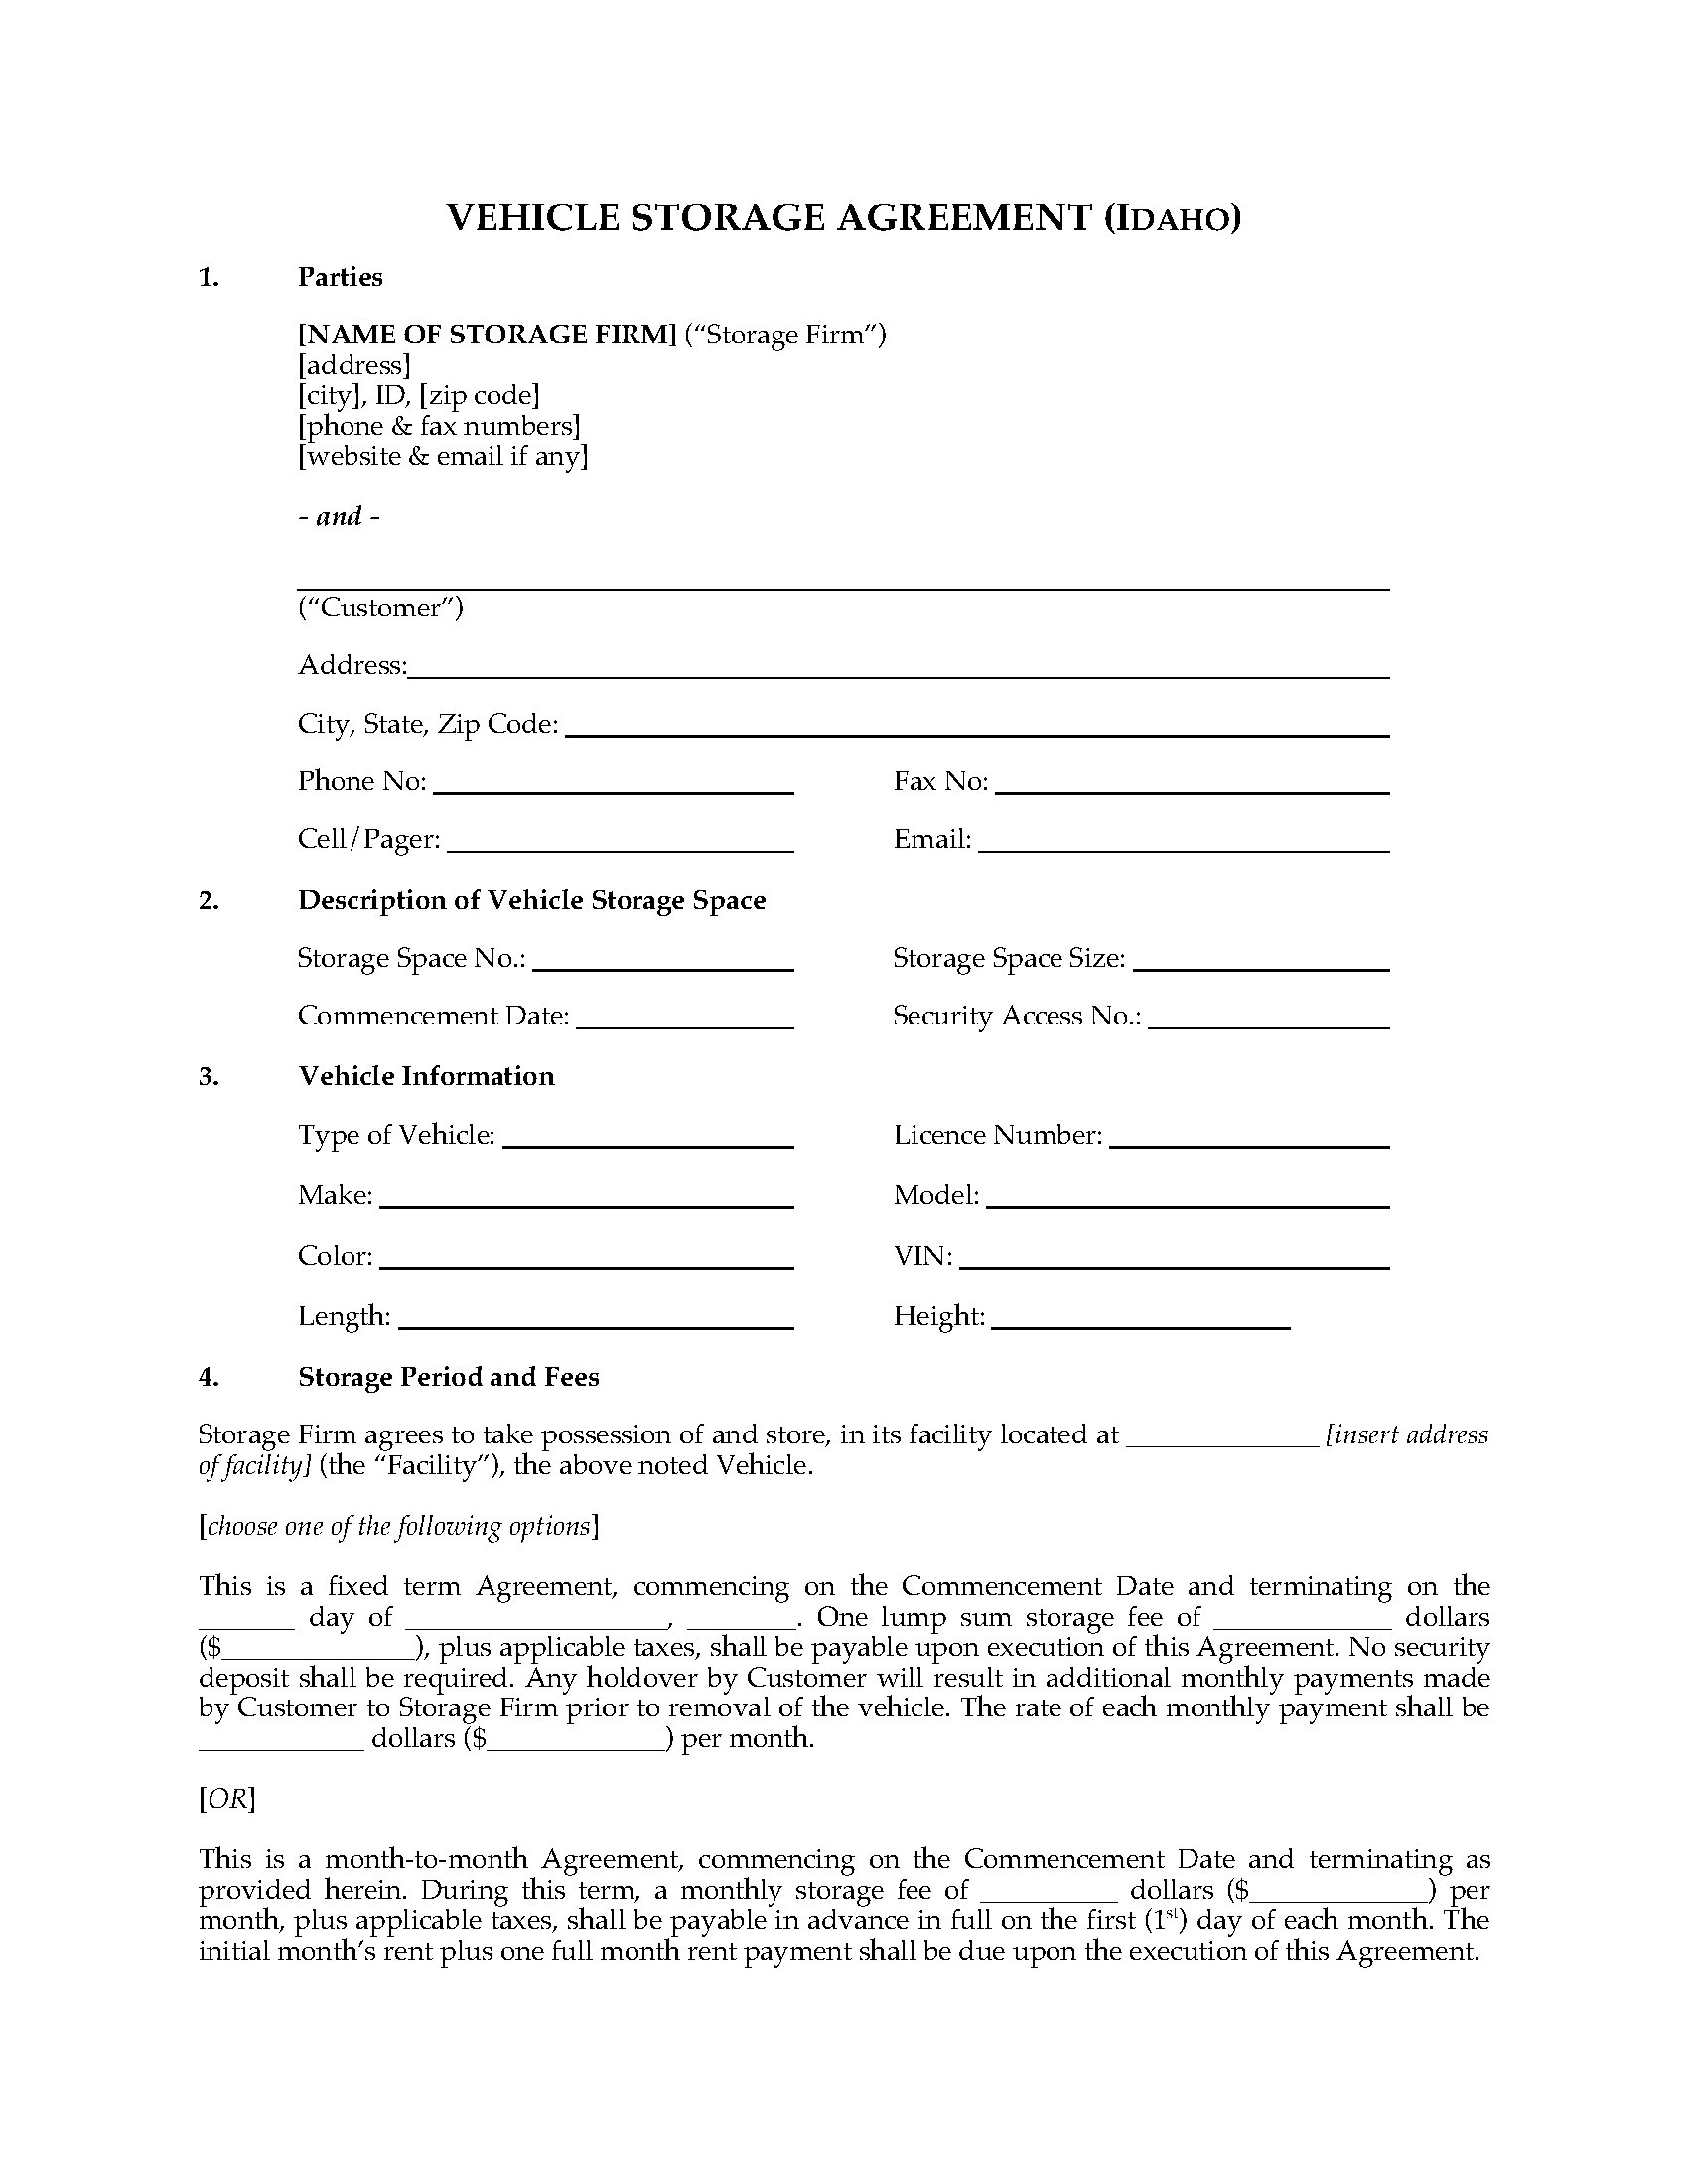 Idaho Vehicle Storage Agreement Legal Forms and Business Templates